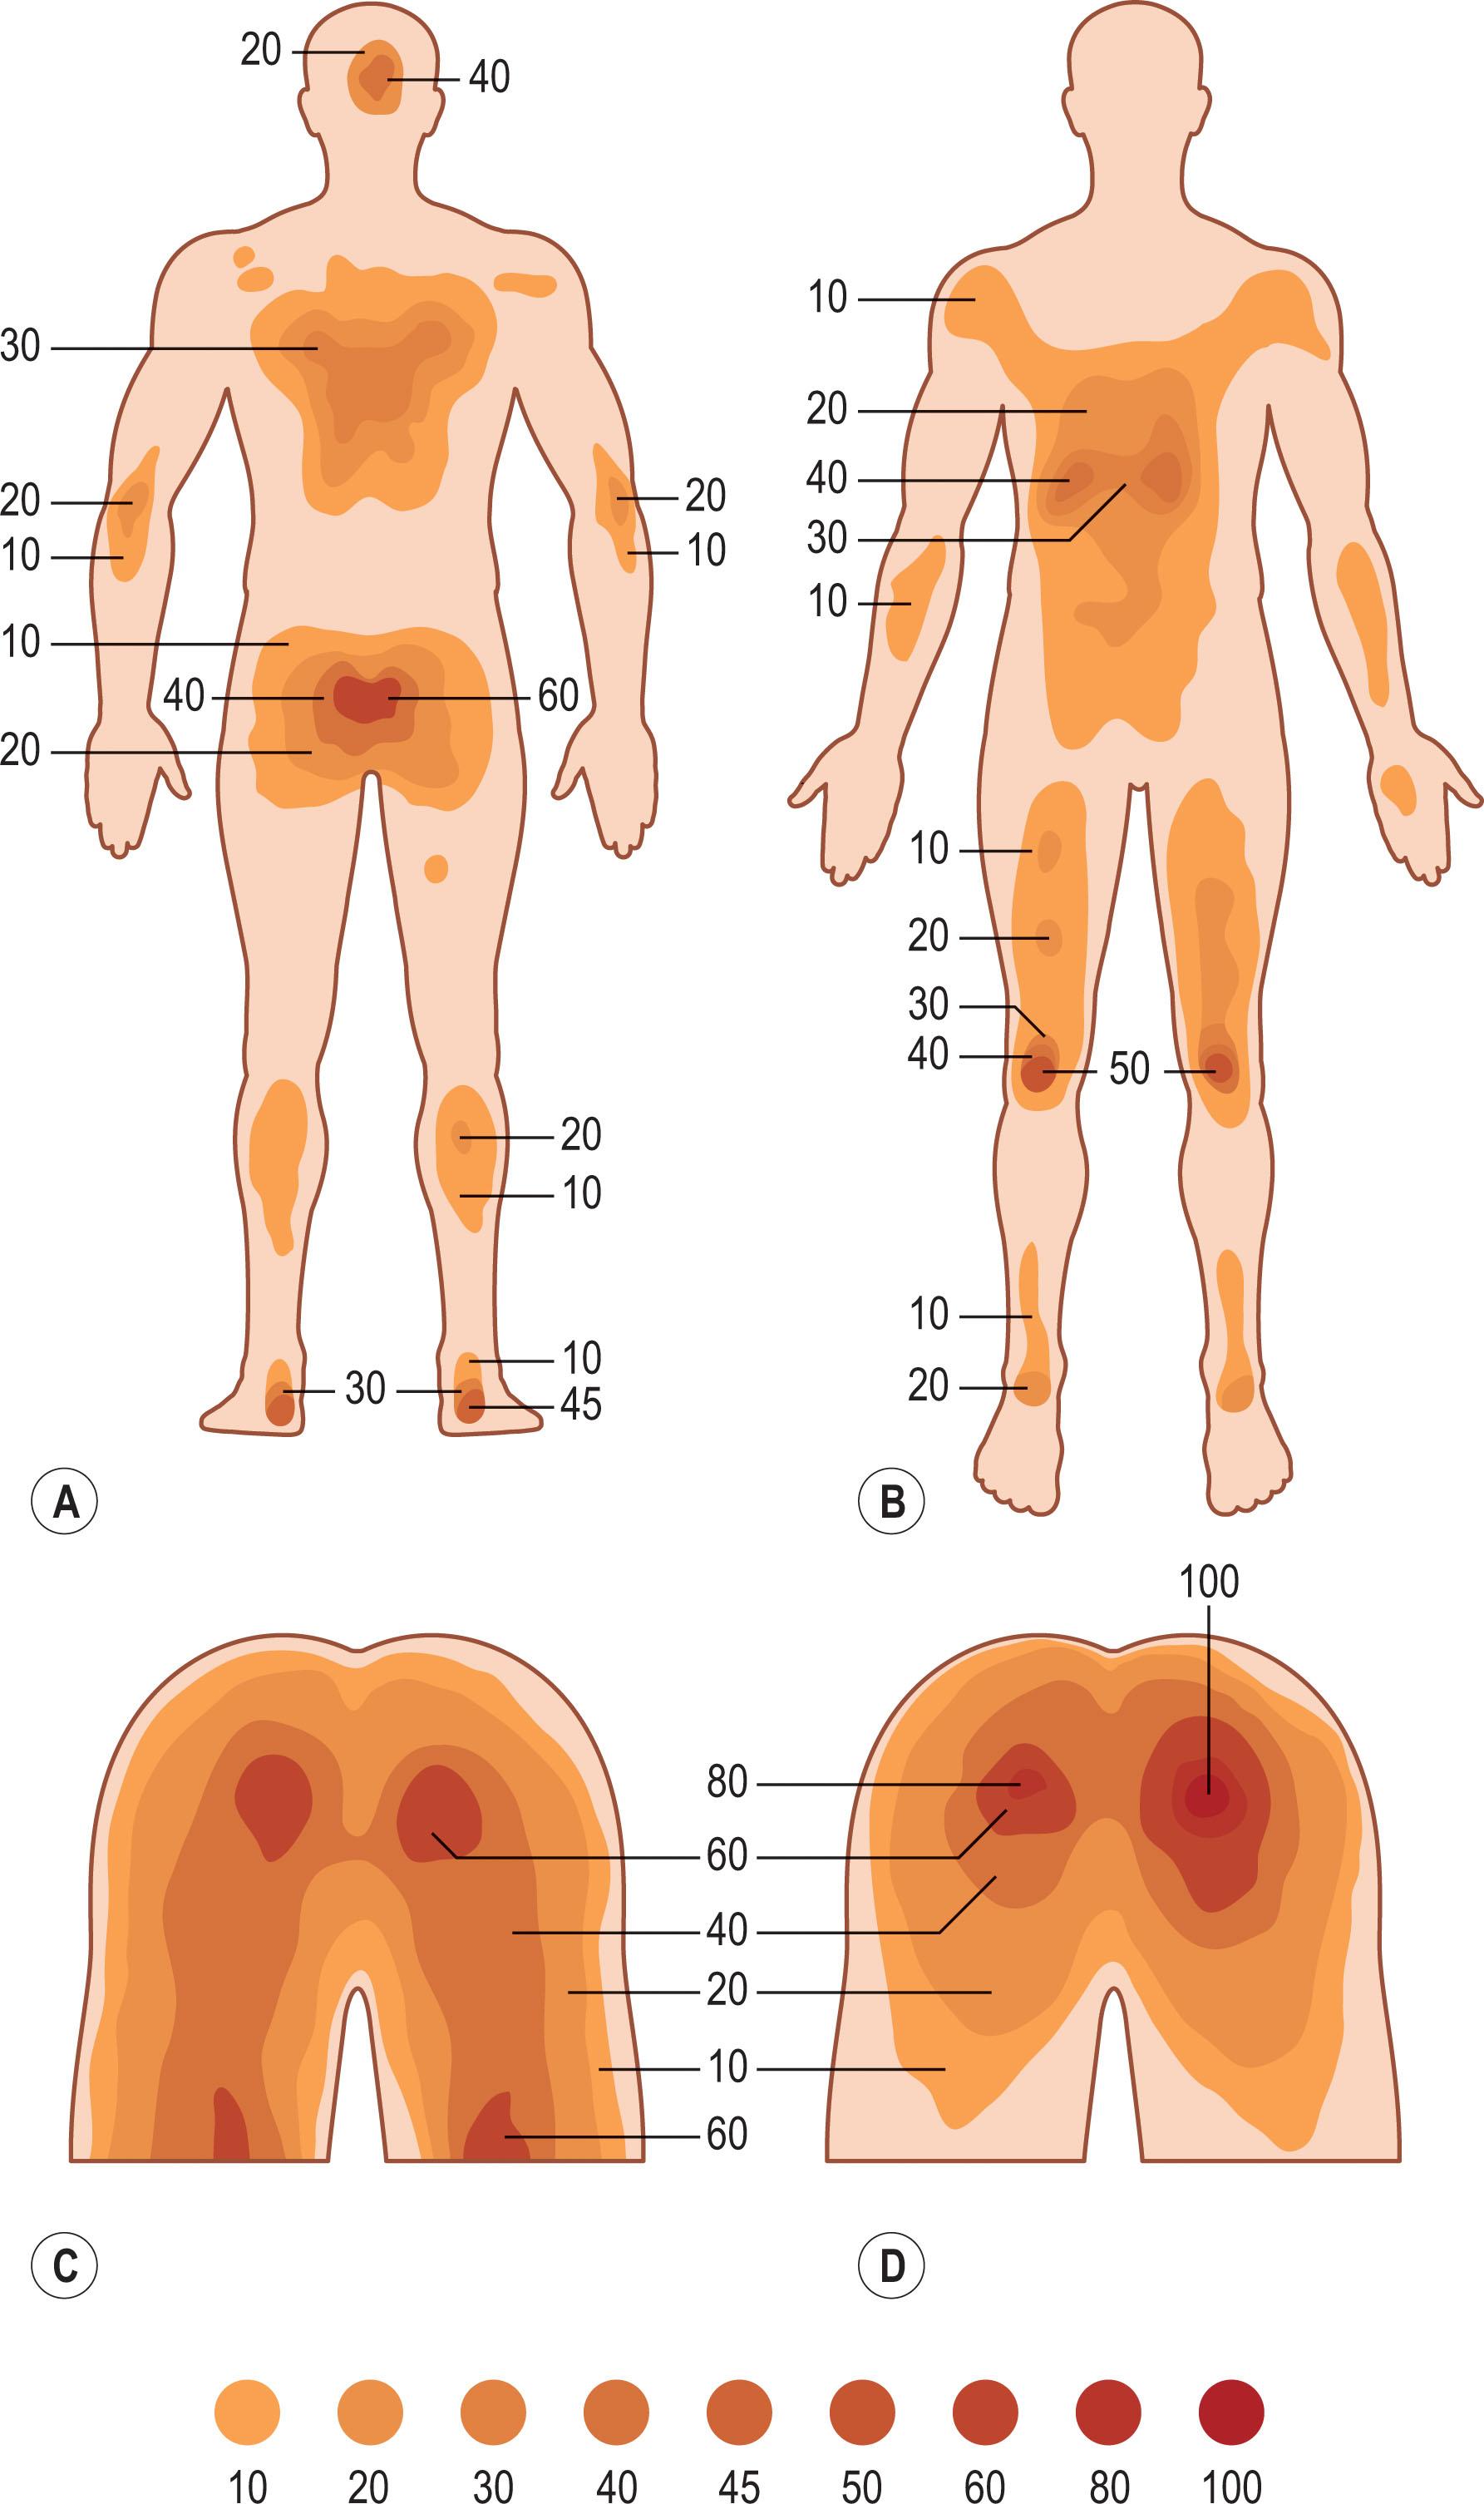 Figure 16.2, Distribution of pressure in a healthy adult male while (A) supine, (B) prone, (C) sitting with feet hanging freely, and (D) sitting with feet supported. Values expressed in mmHg.